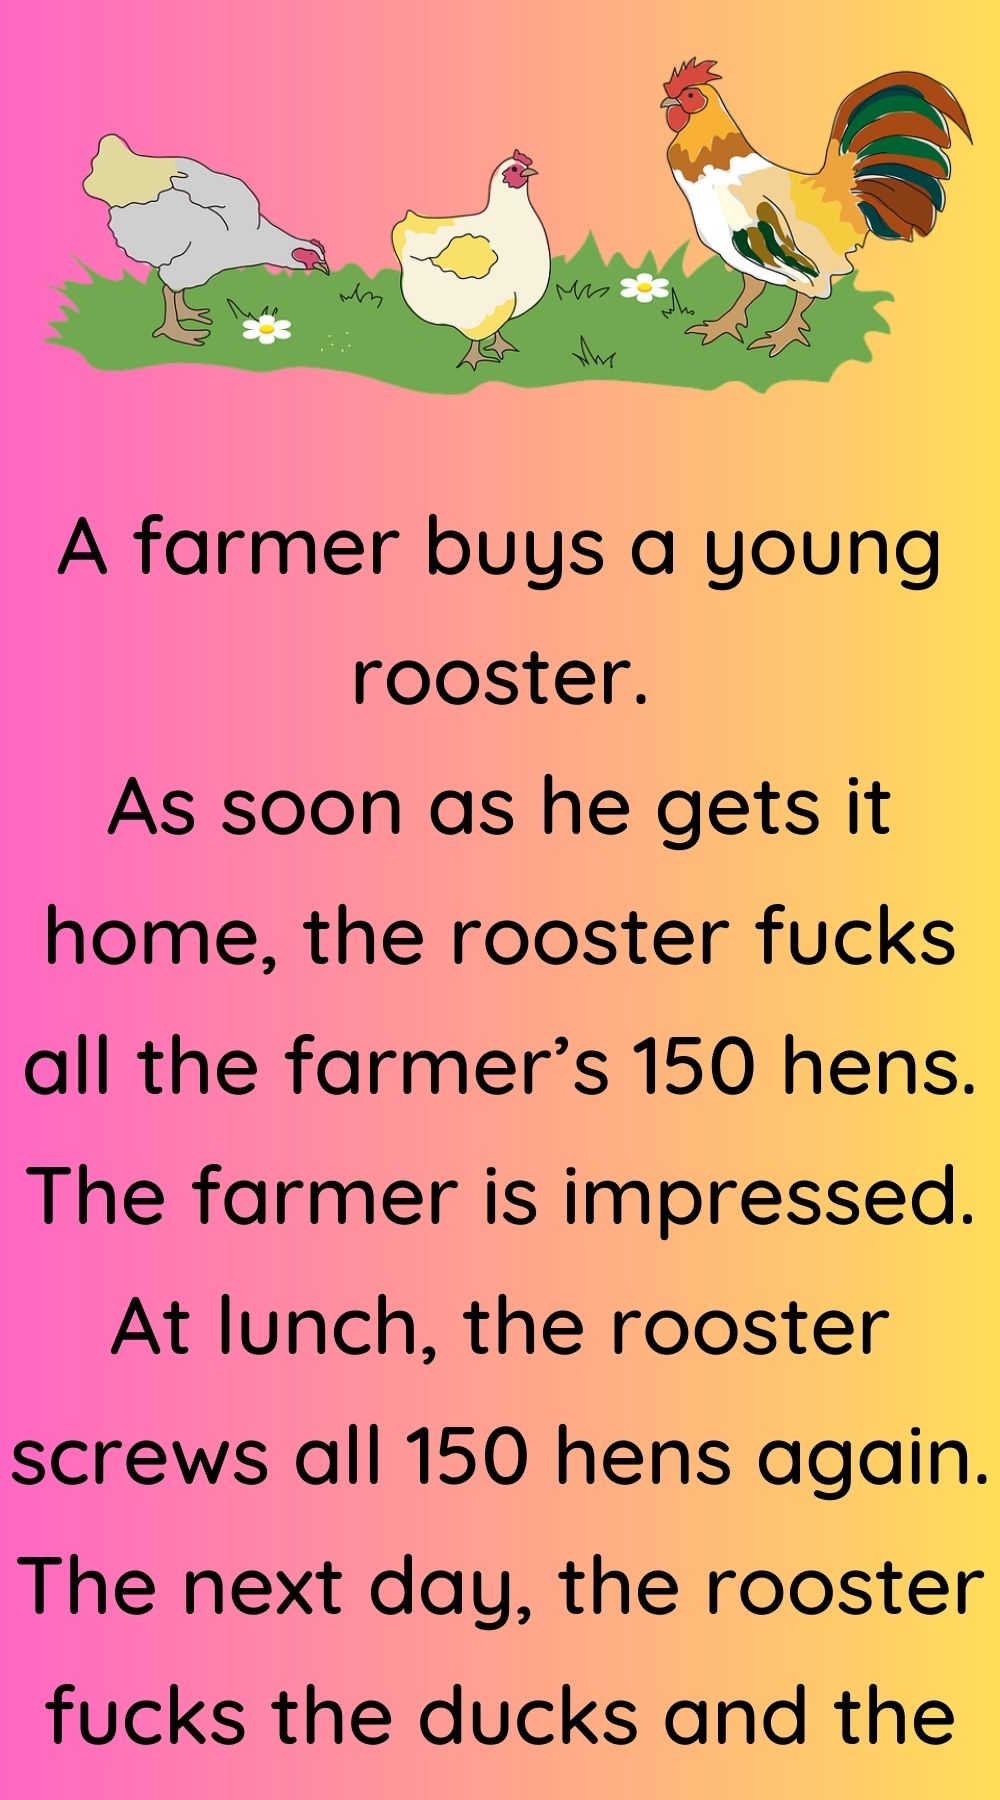 A farmer buys a young rooster
